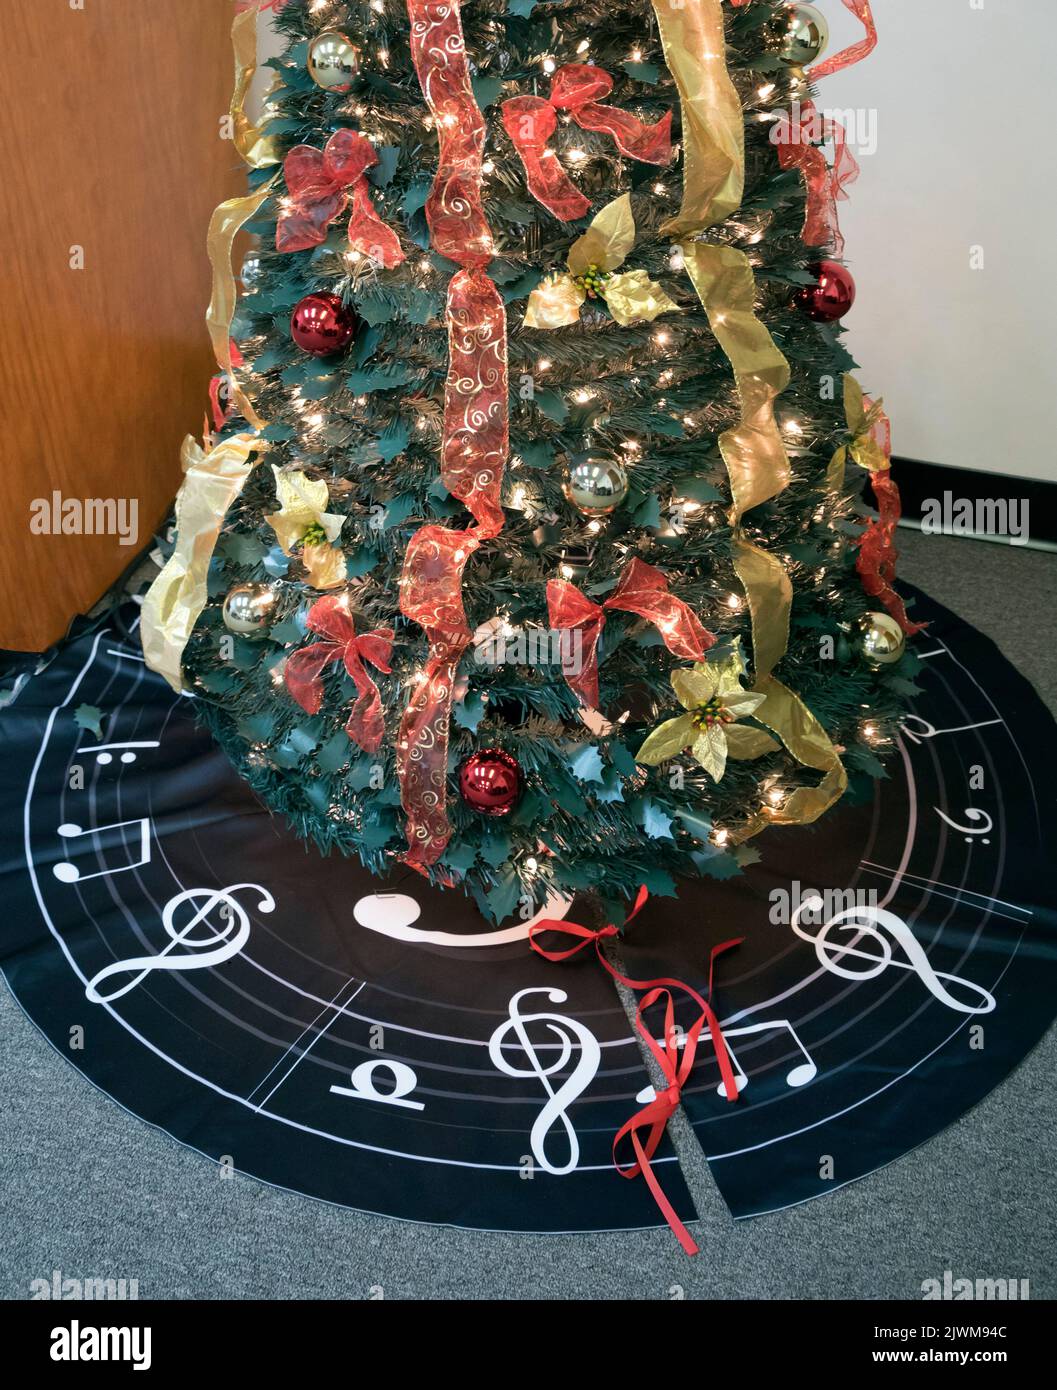 Christmas Tree with a musical motif. Stock Photo